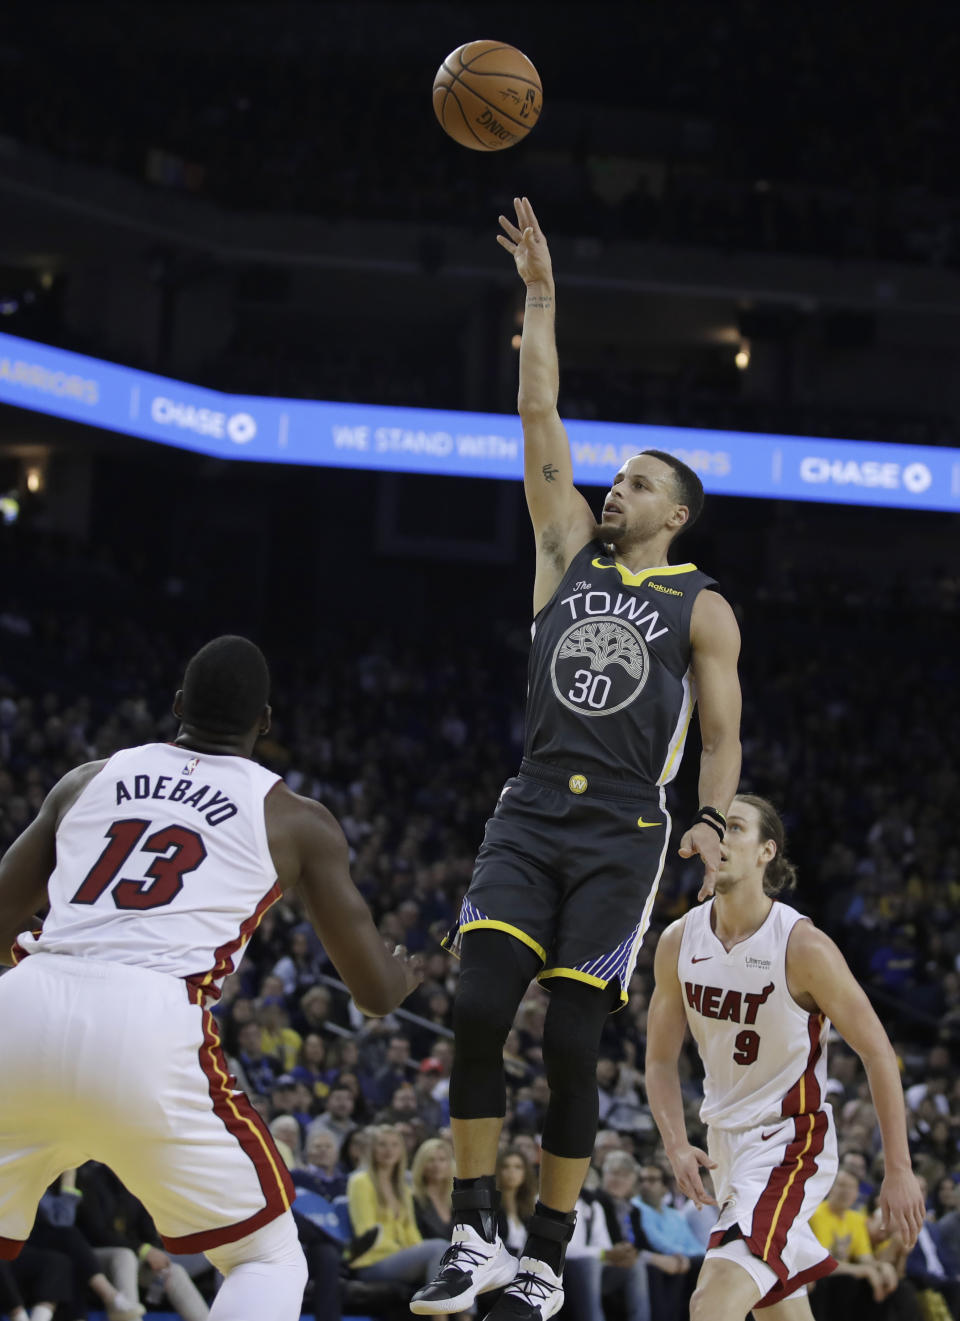 Golden State Warriors' Stephen Curry (30) shoots between Miami Heat center Bam Adebayo (13) and Kelly Olynyk (9) during the second half of an NBA basketball game, Sunday, Feb. 10, 2019, in Oakland, Calif. (AP Photo/Ben Margot)